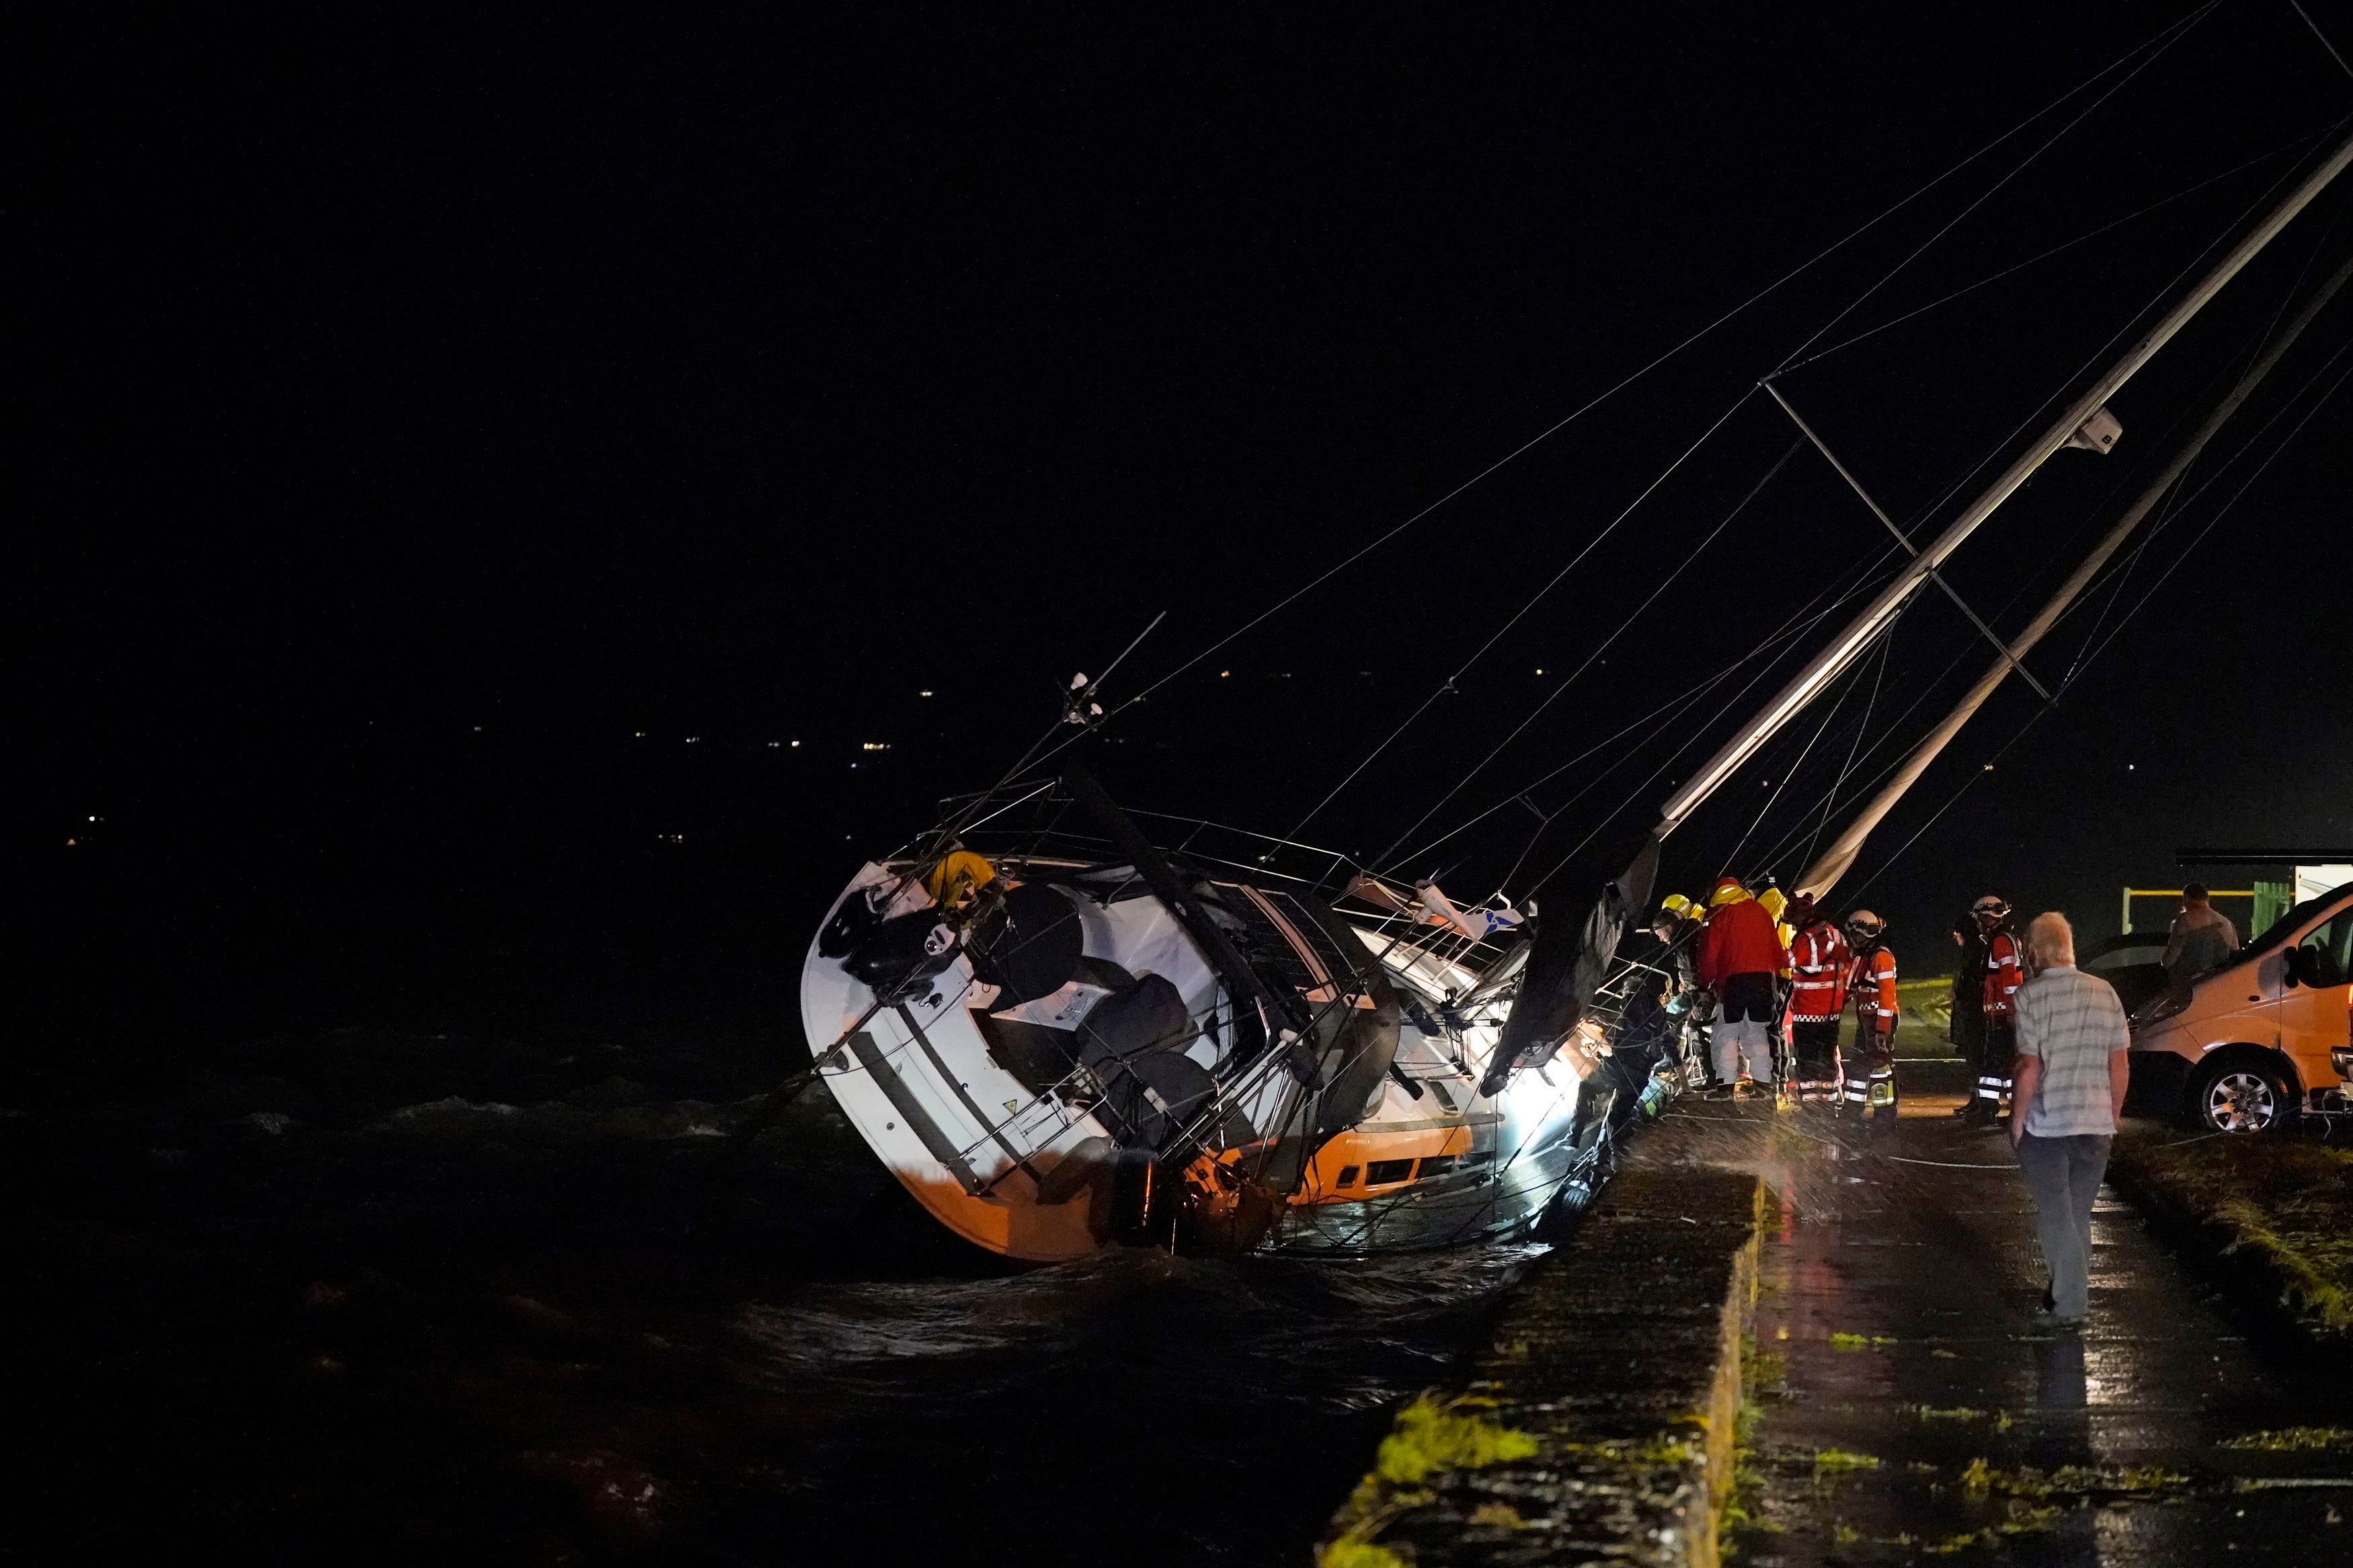 Members of the Coast Guard inspect the damage to a boat after it broke free from its berth and crashed into the harbour during Storm Betty in Dungarvan, County Waterford